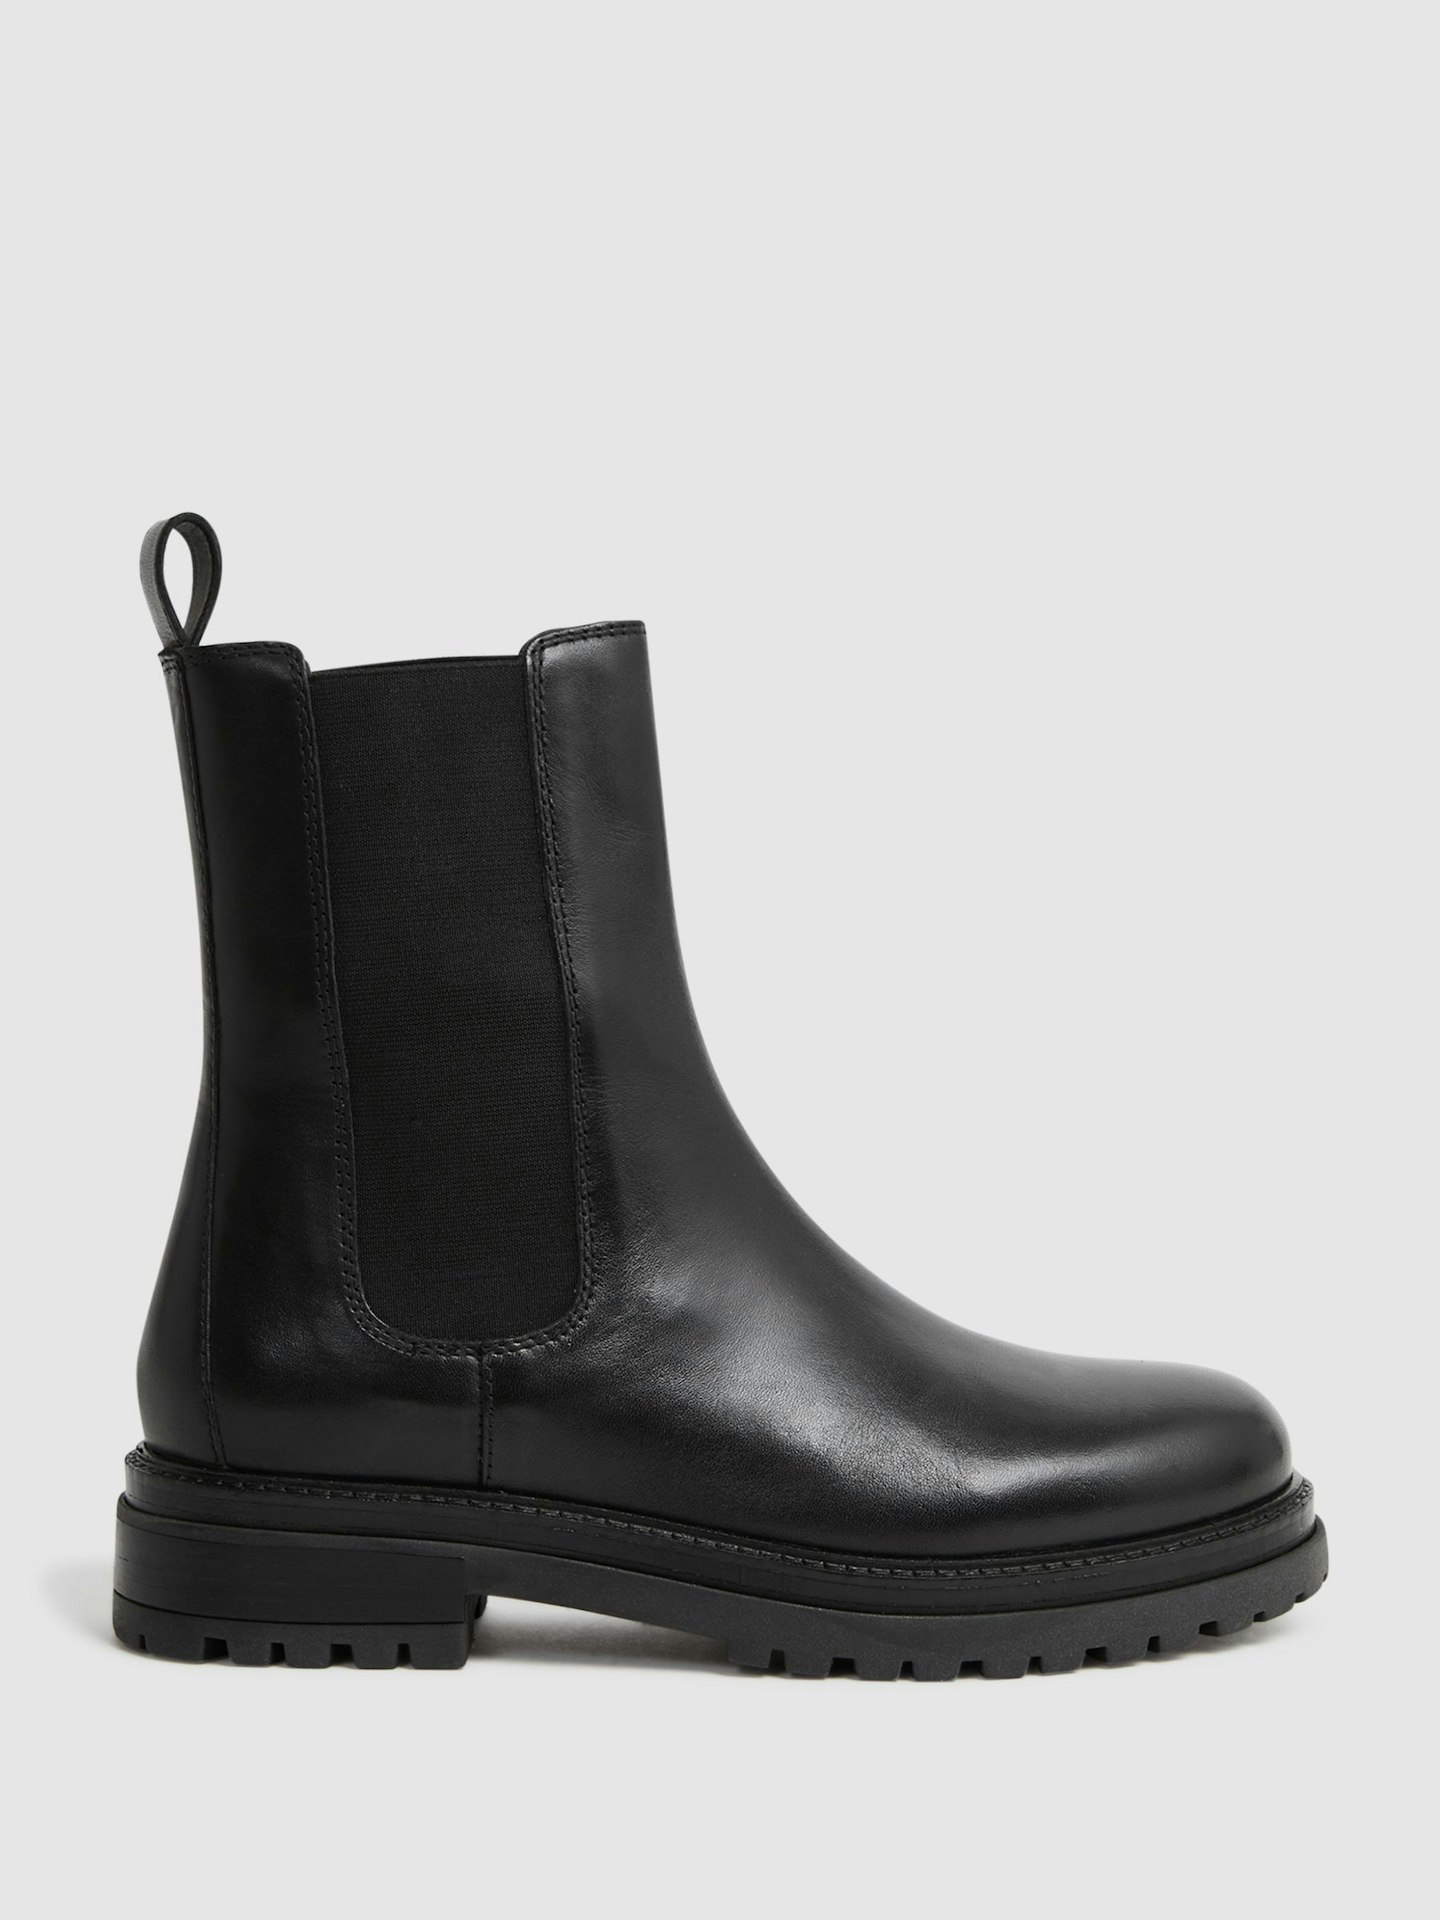 Reiss, Thea Leather Chelsea Boots